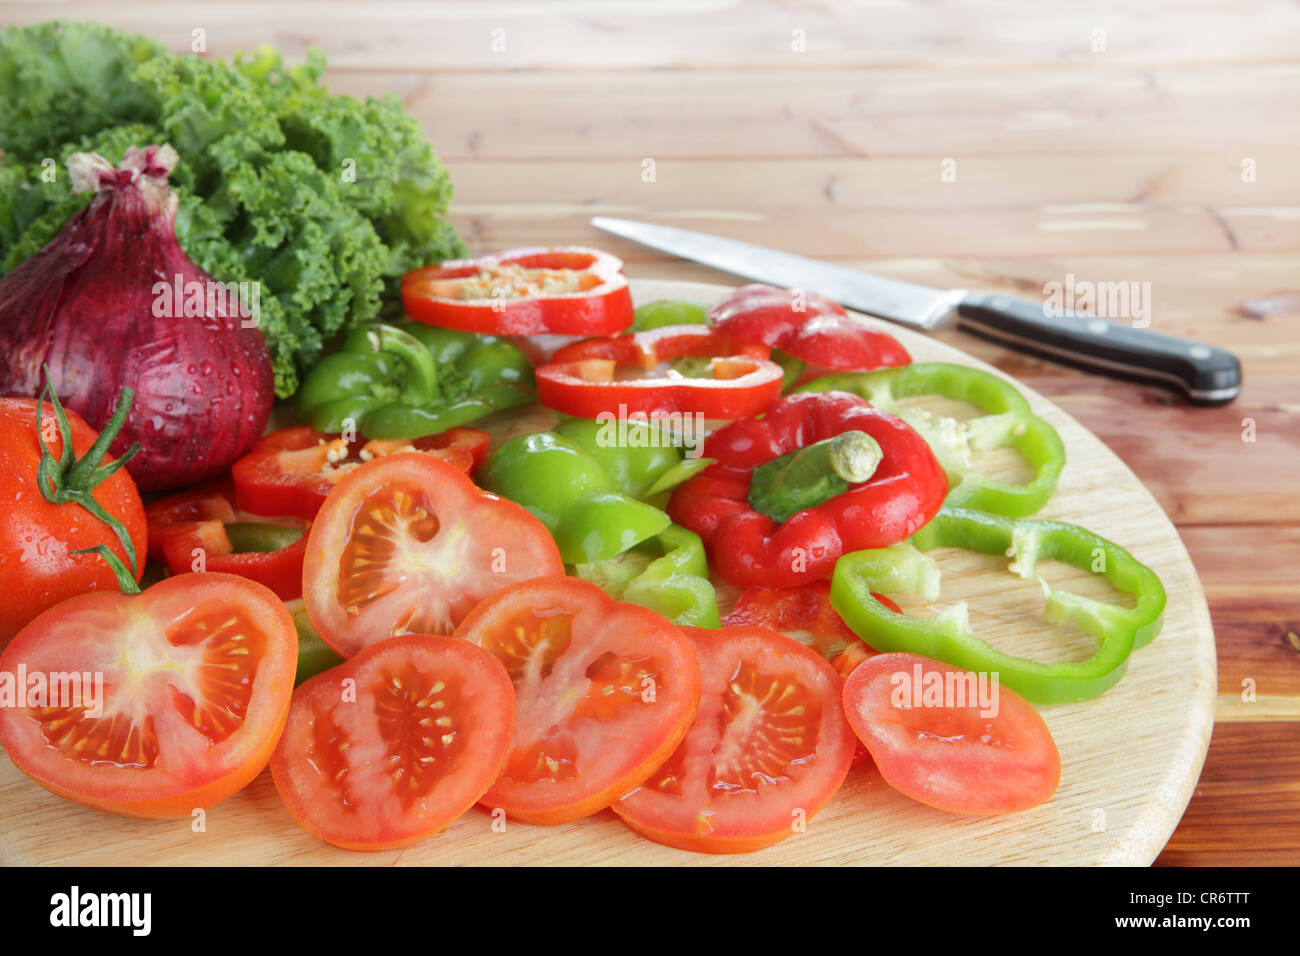 Salad ingredients including tomatoes, kale, onions, and red and green peppers Stock Photo